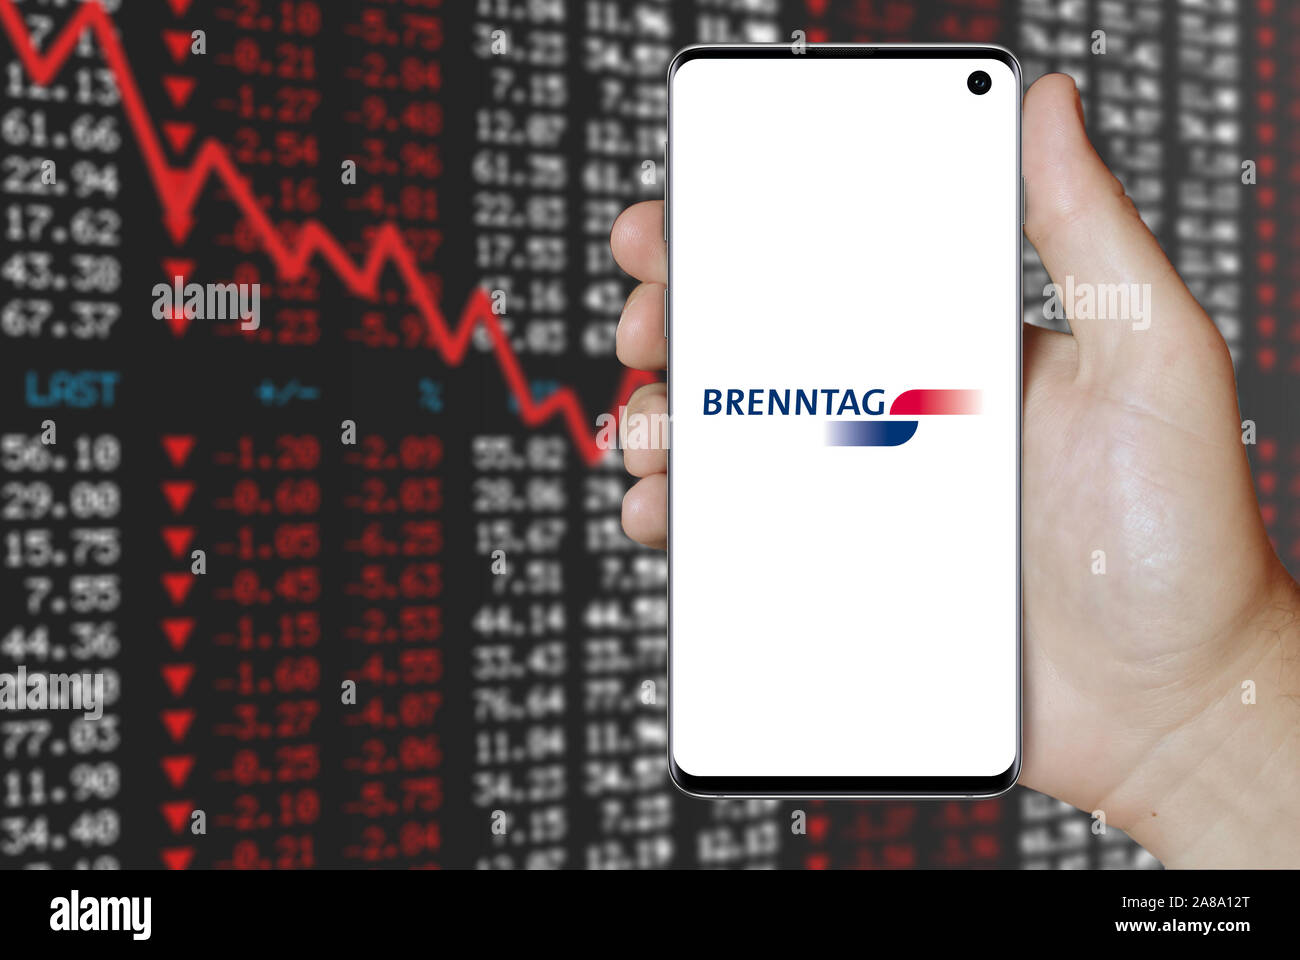 Logo of public company Brenntag AG displayed on a smartphone. Negative stock market background. Credit: PIXDUCE Stock Photo